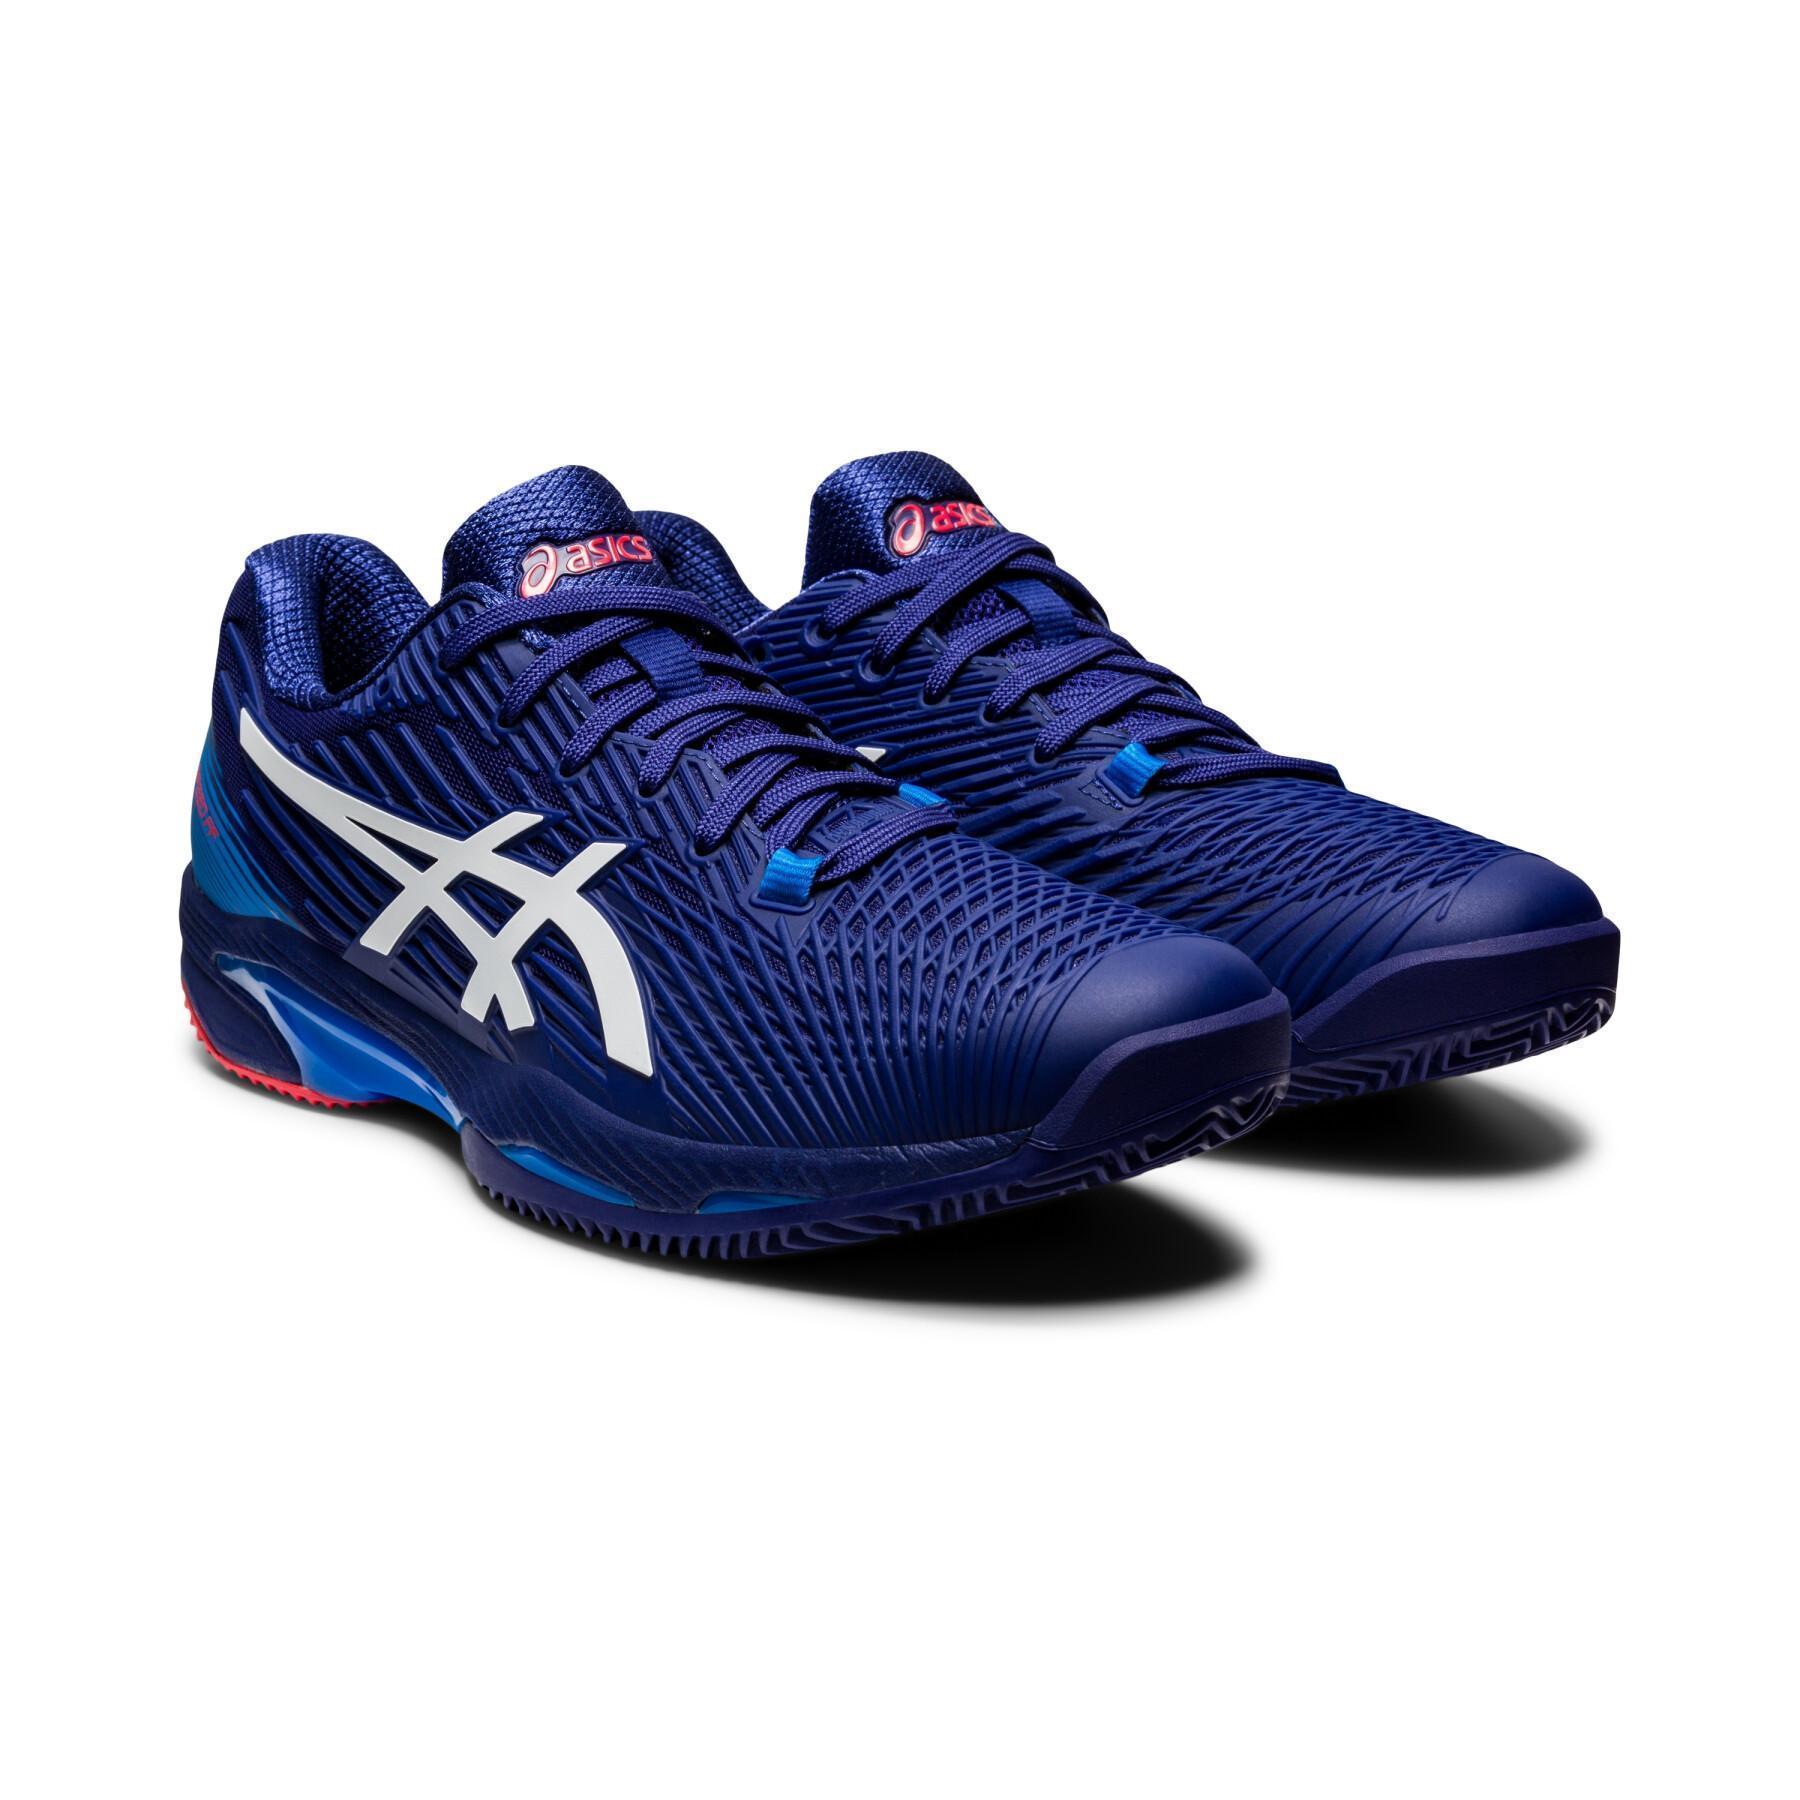 Tennis shoes Asics Solution speed FF 2 clay